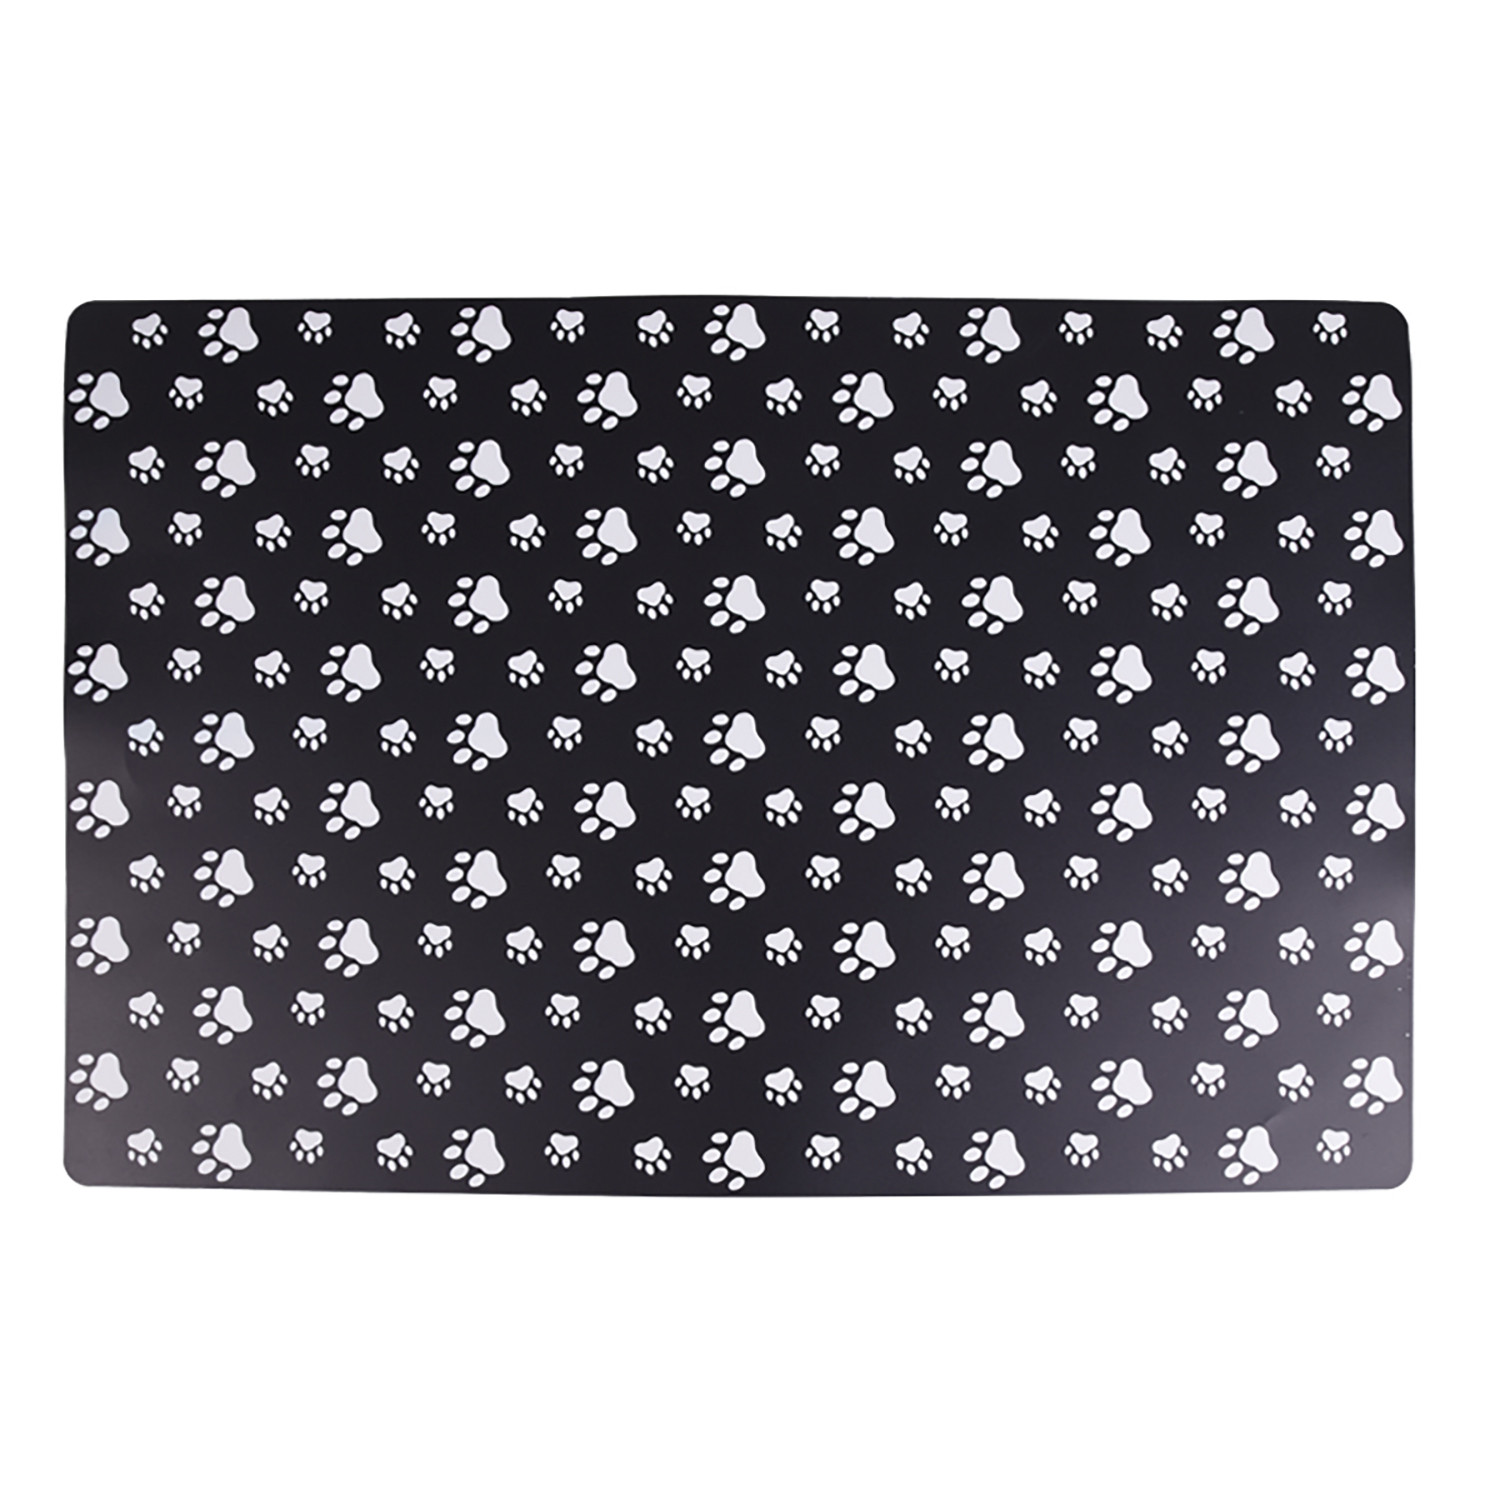 Clever Paws Paw Print Placemat 45 x 30cm Image